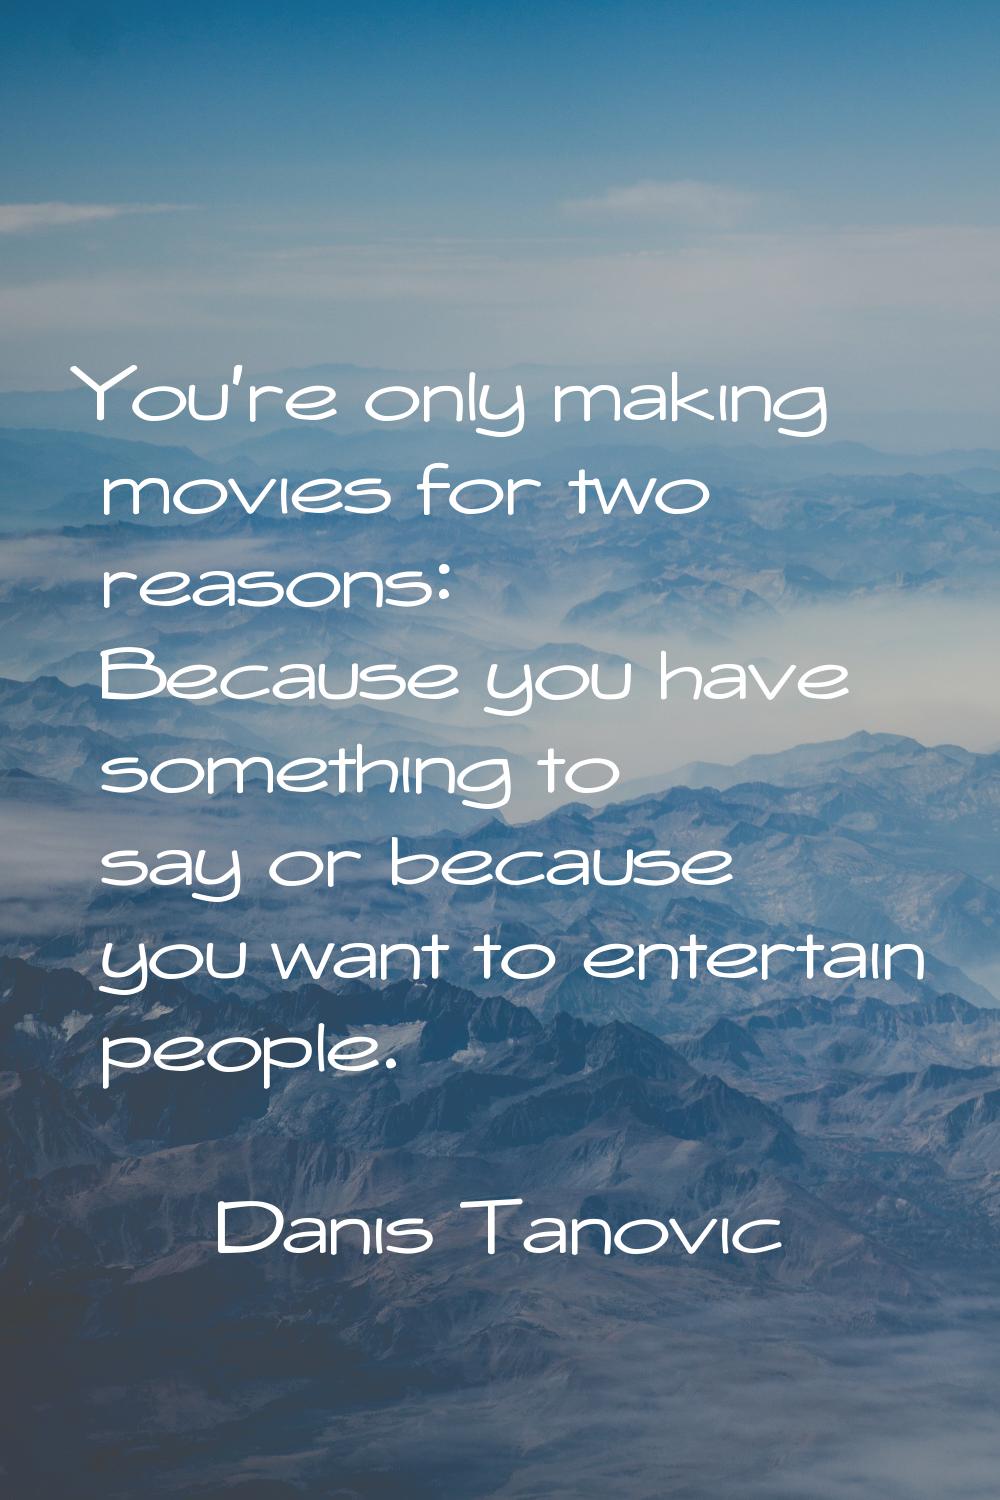 You're only making movies for two reasons: Because you have something to say or because you want to